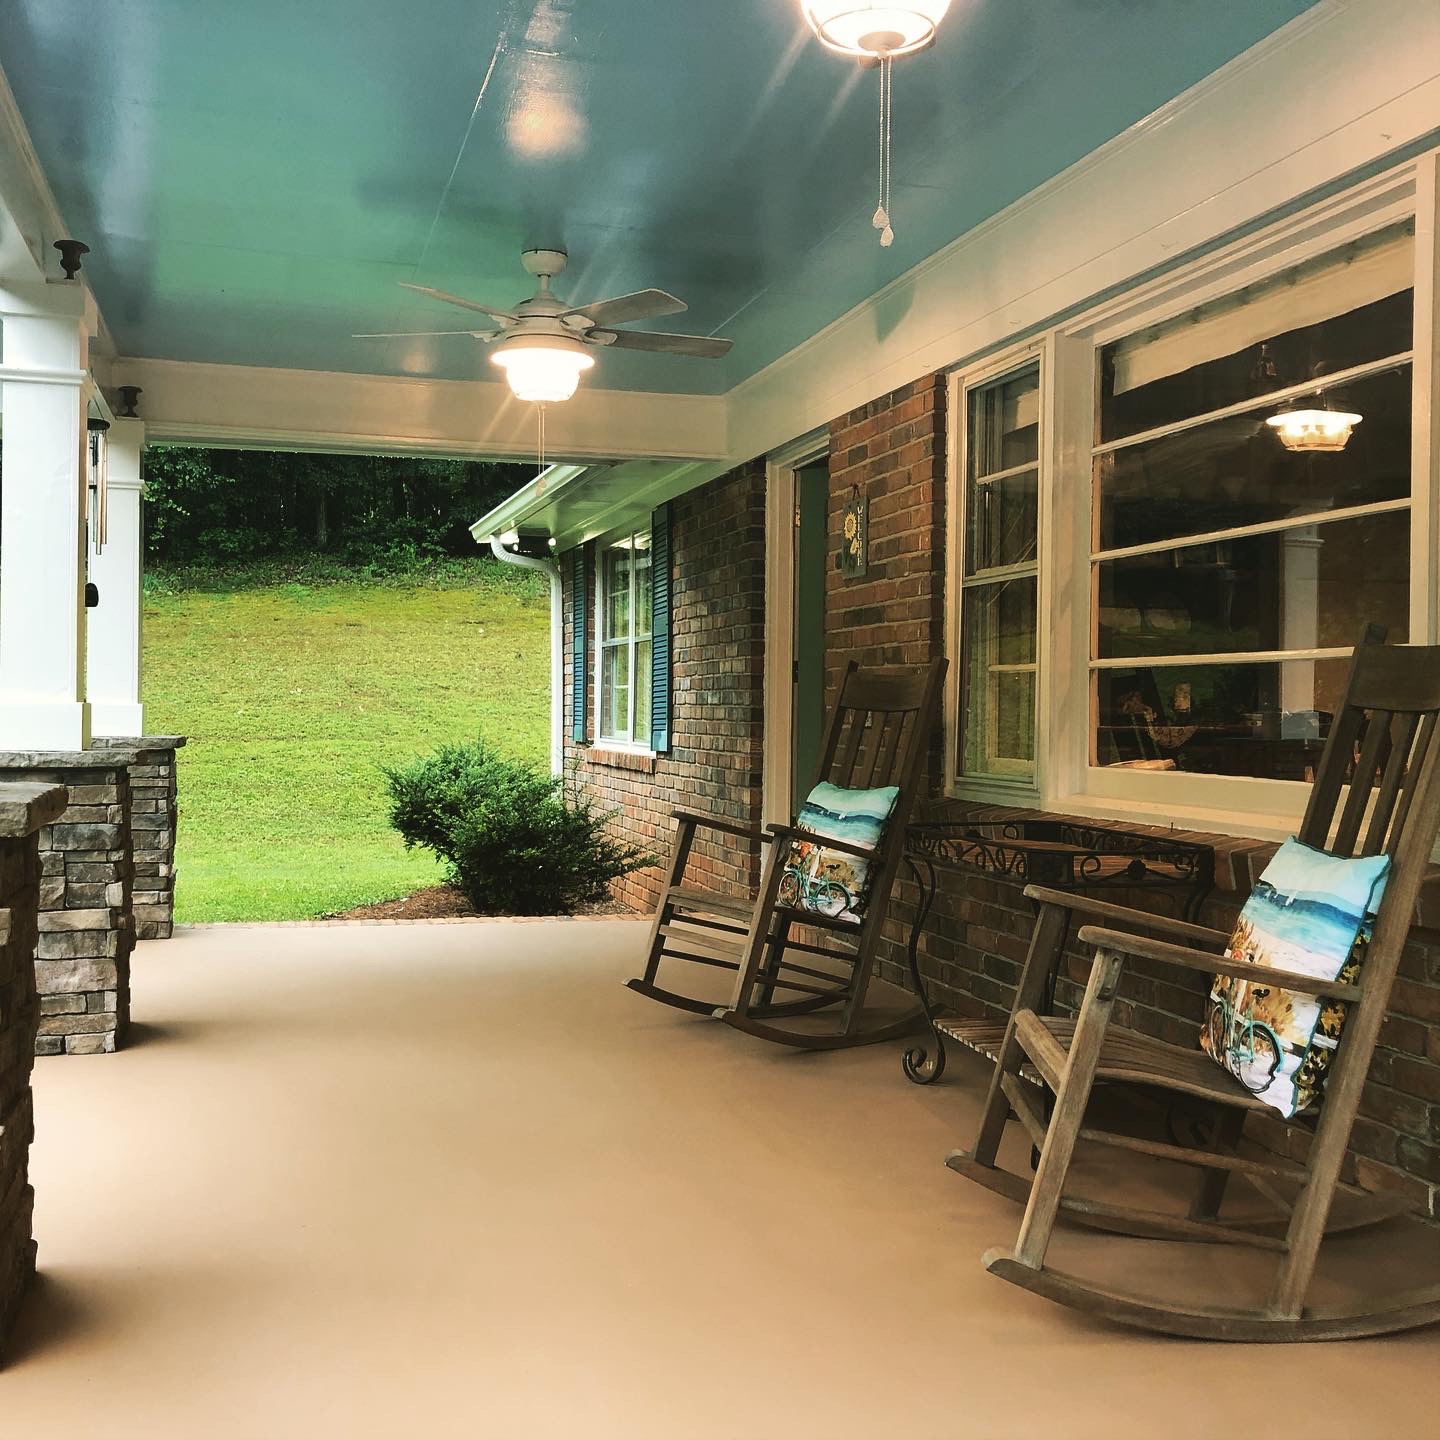 Blue Porch Ceilings - Is It True They Help Bugs Away? - Designs Donna Atlanta